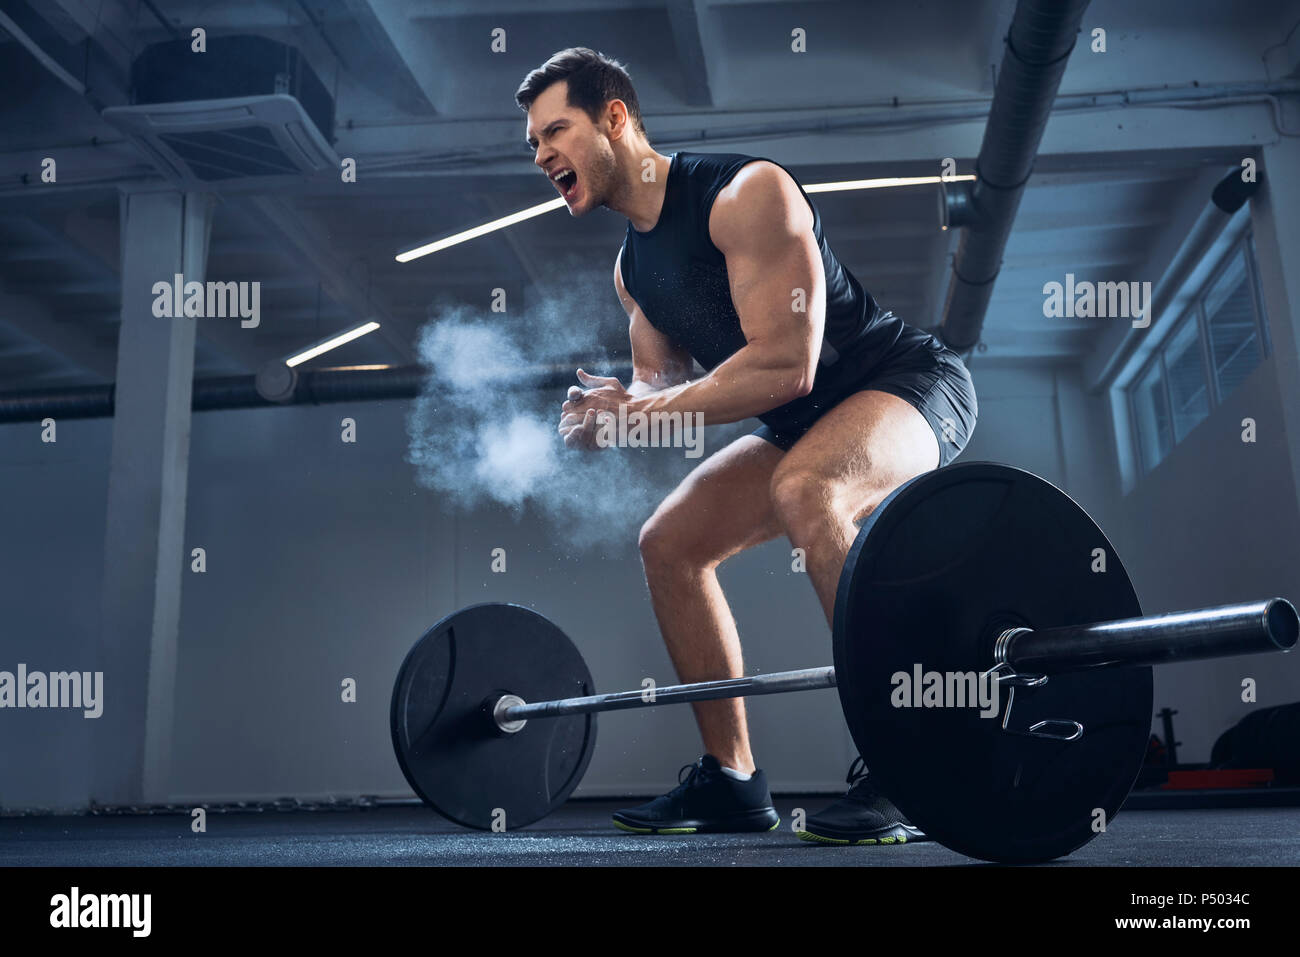 Motivated weightlifter clapping hands before barbell workout at gym Stock Photo